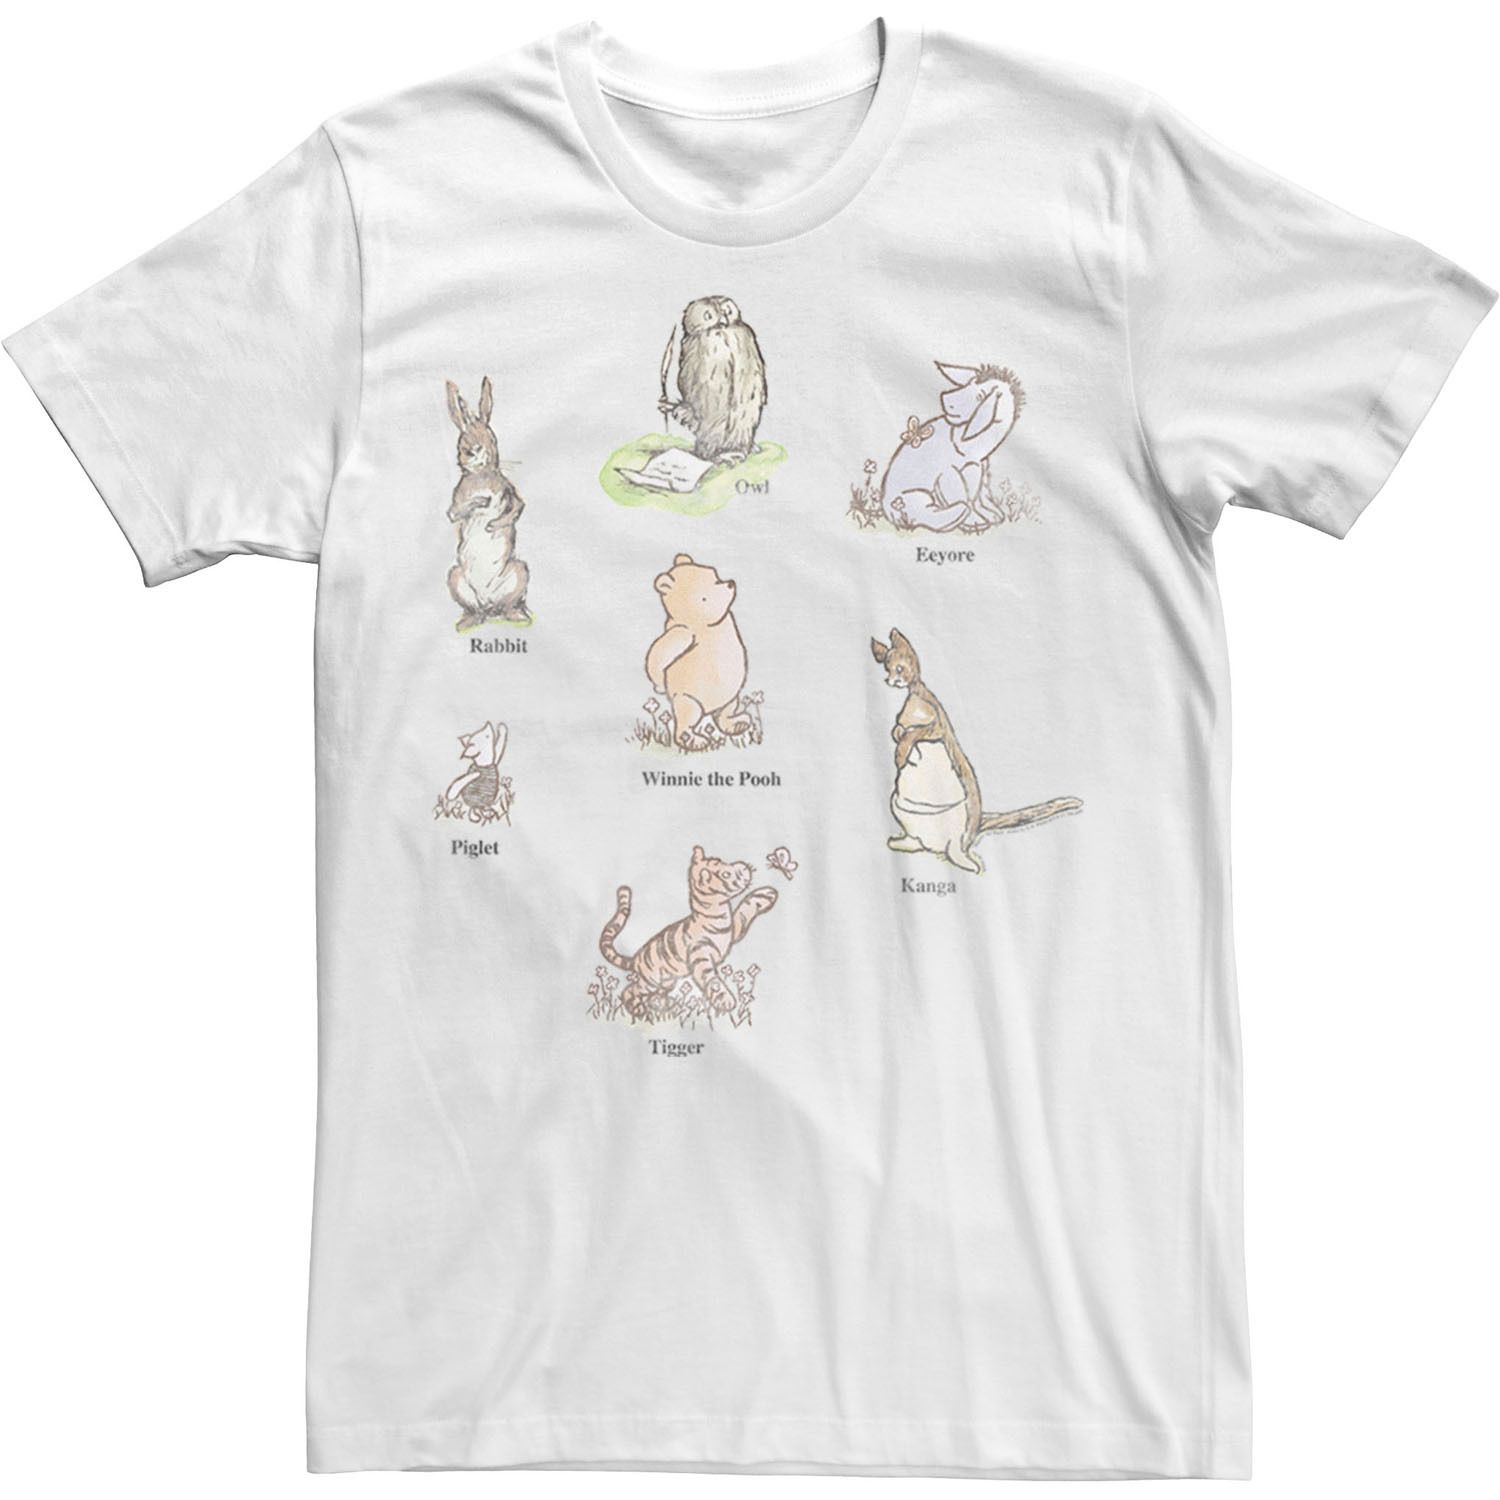 Image for Licensed Character Men's Disney Winnie The Pooh Classic Group Shot Tee at Kohl's.